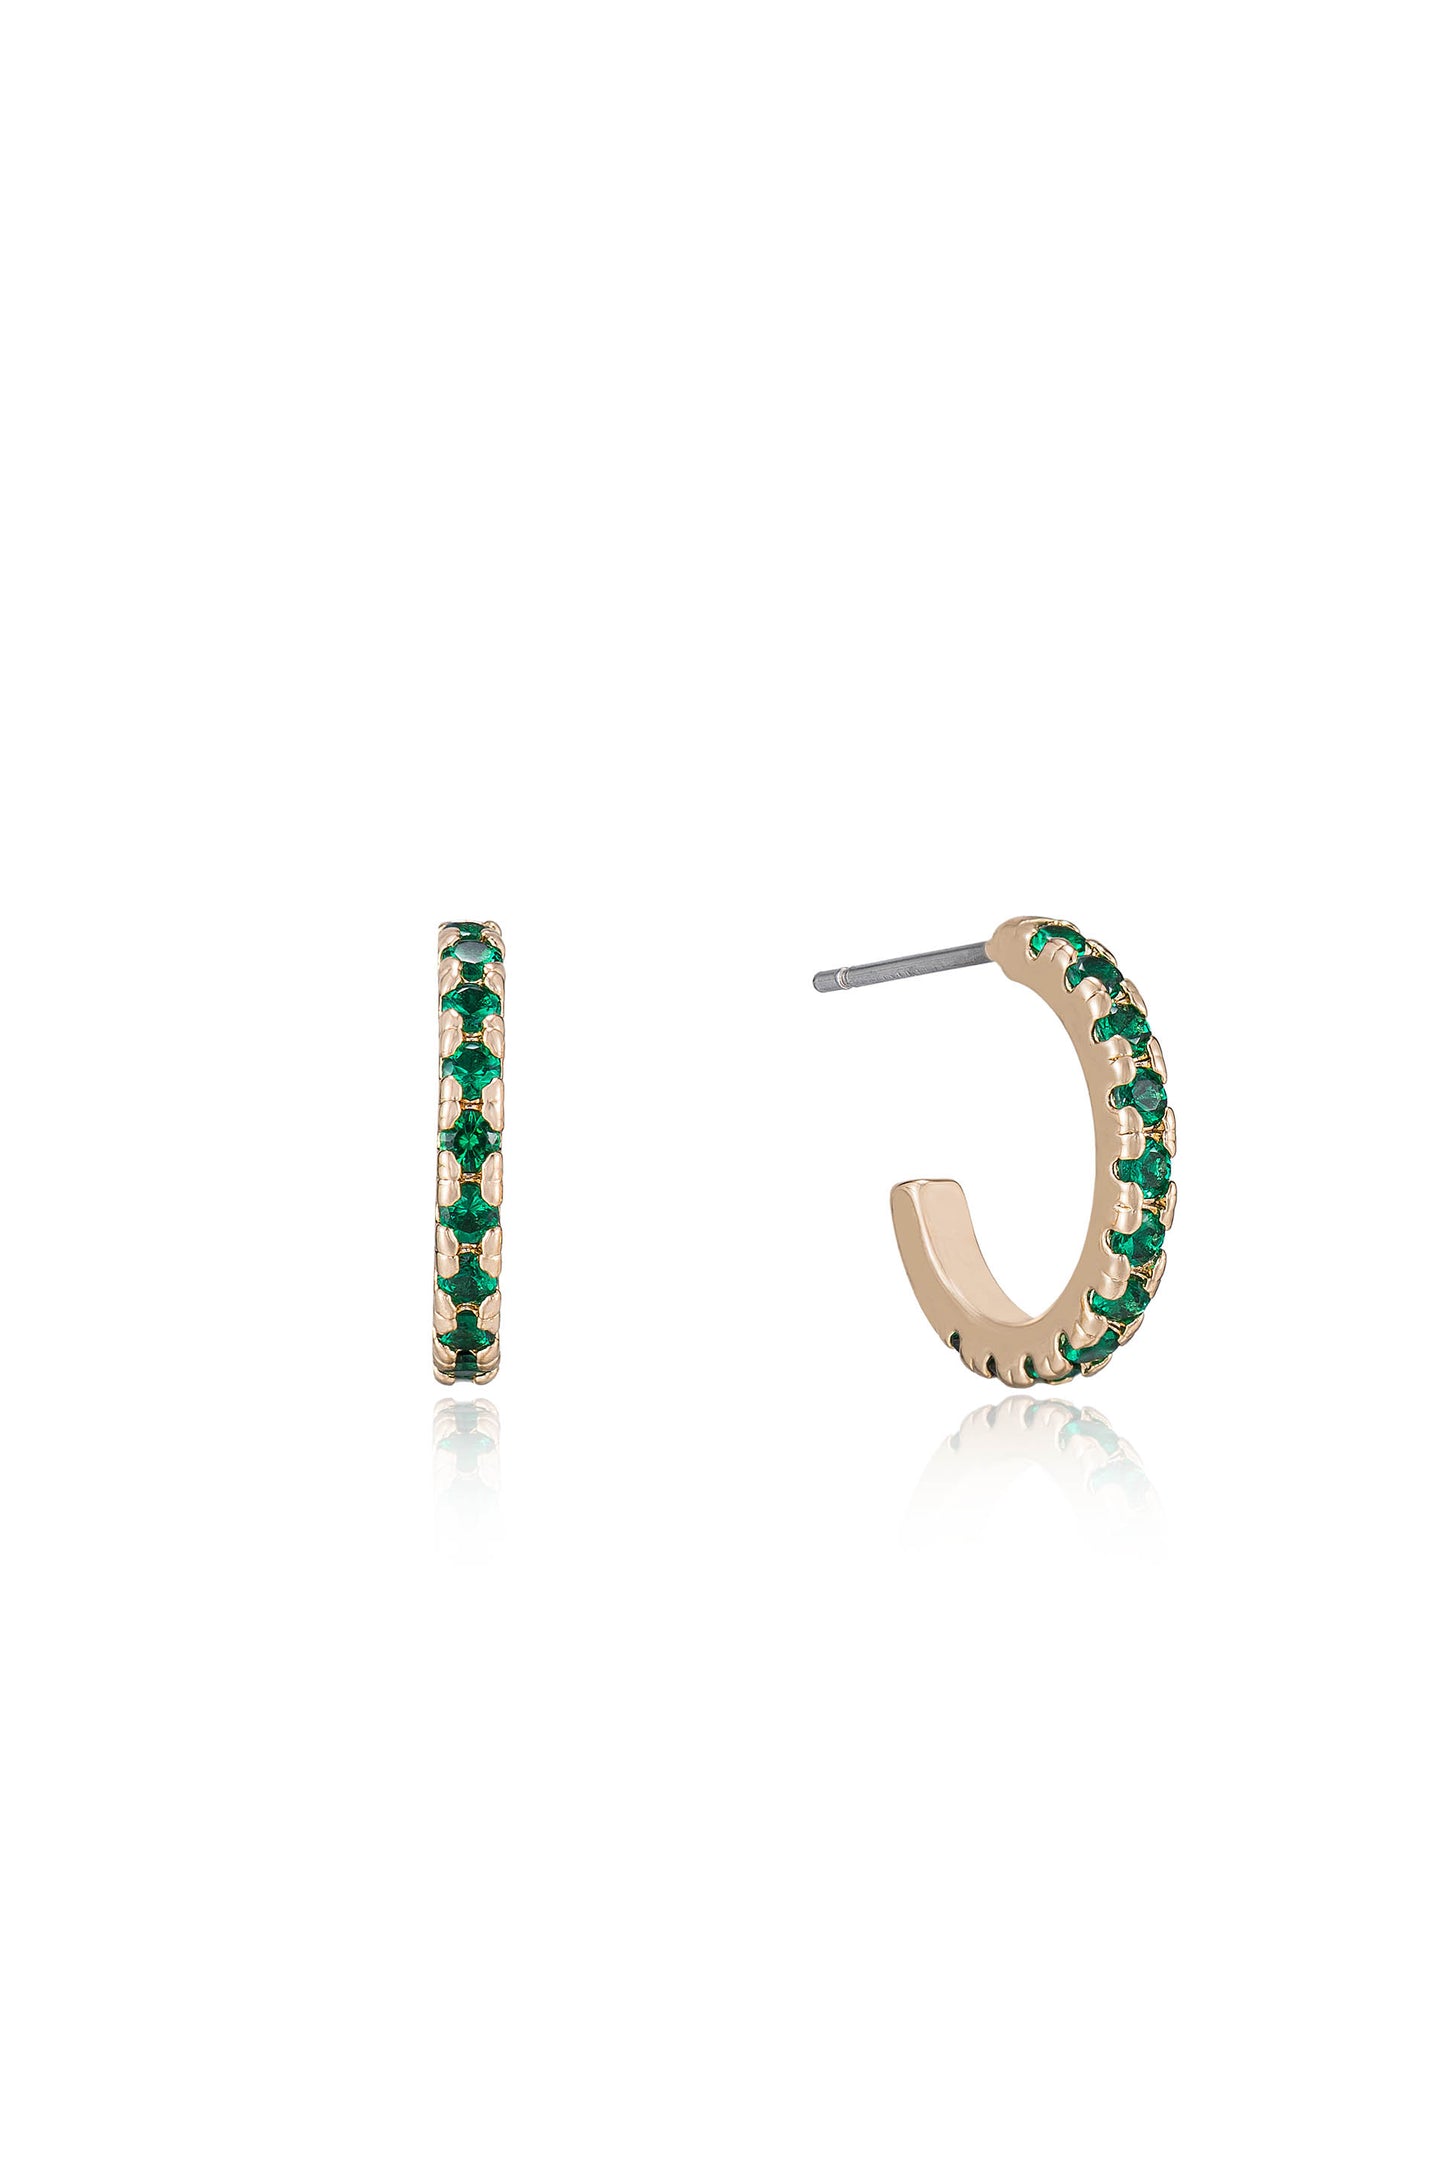 Colorful Crystal 18k Gold Plated Huggie Earrings in green